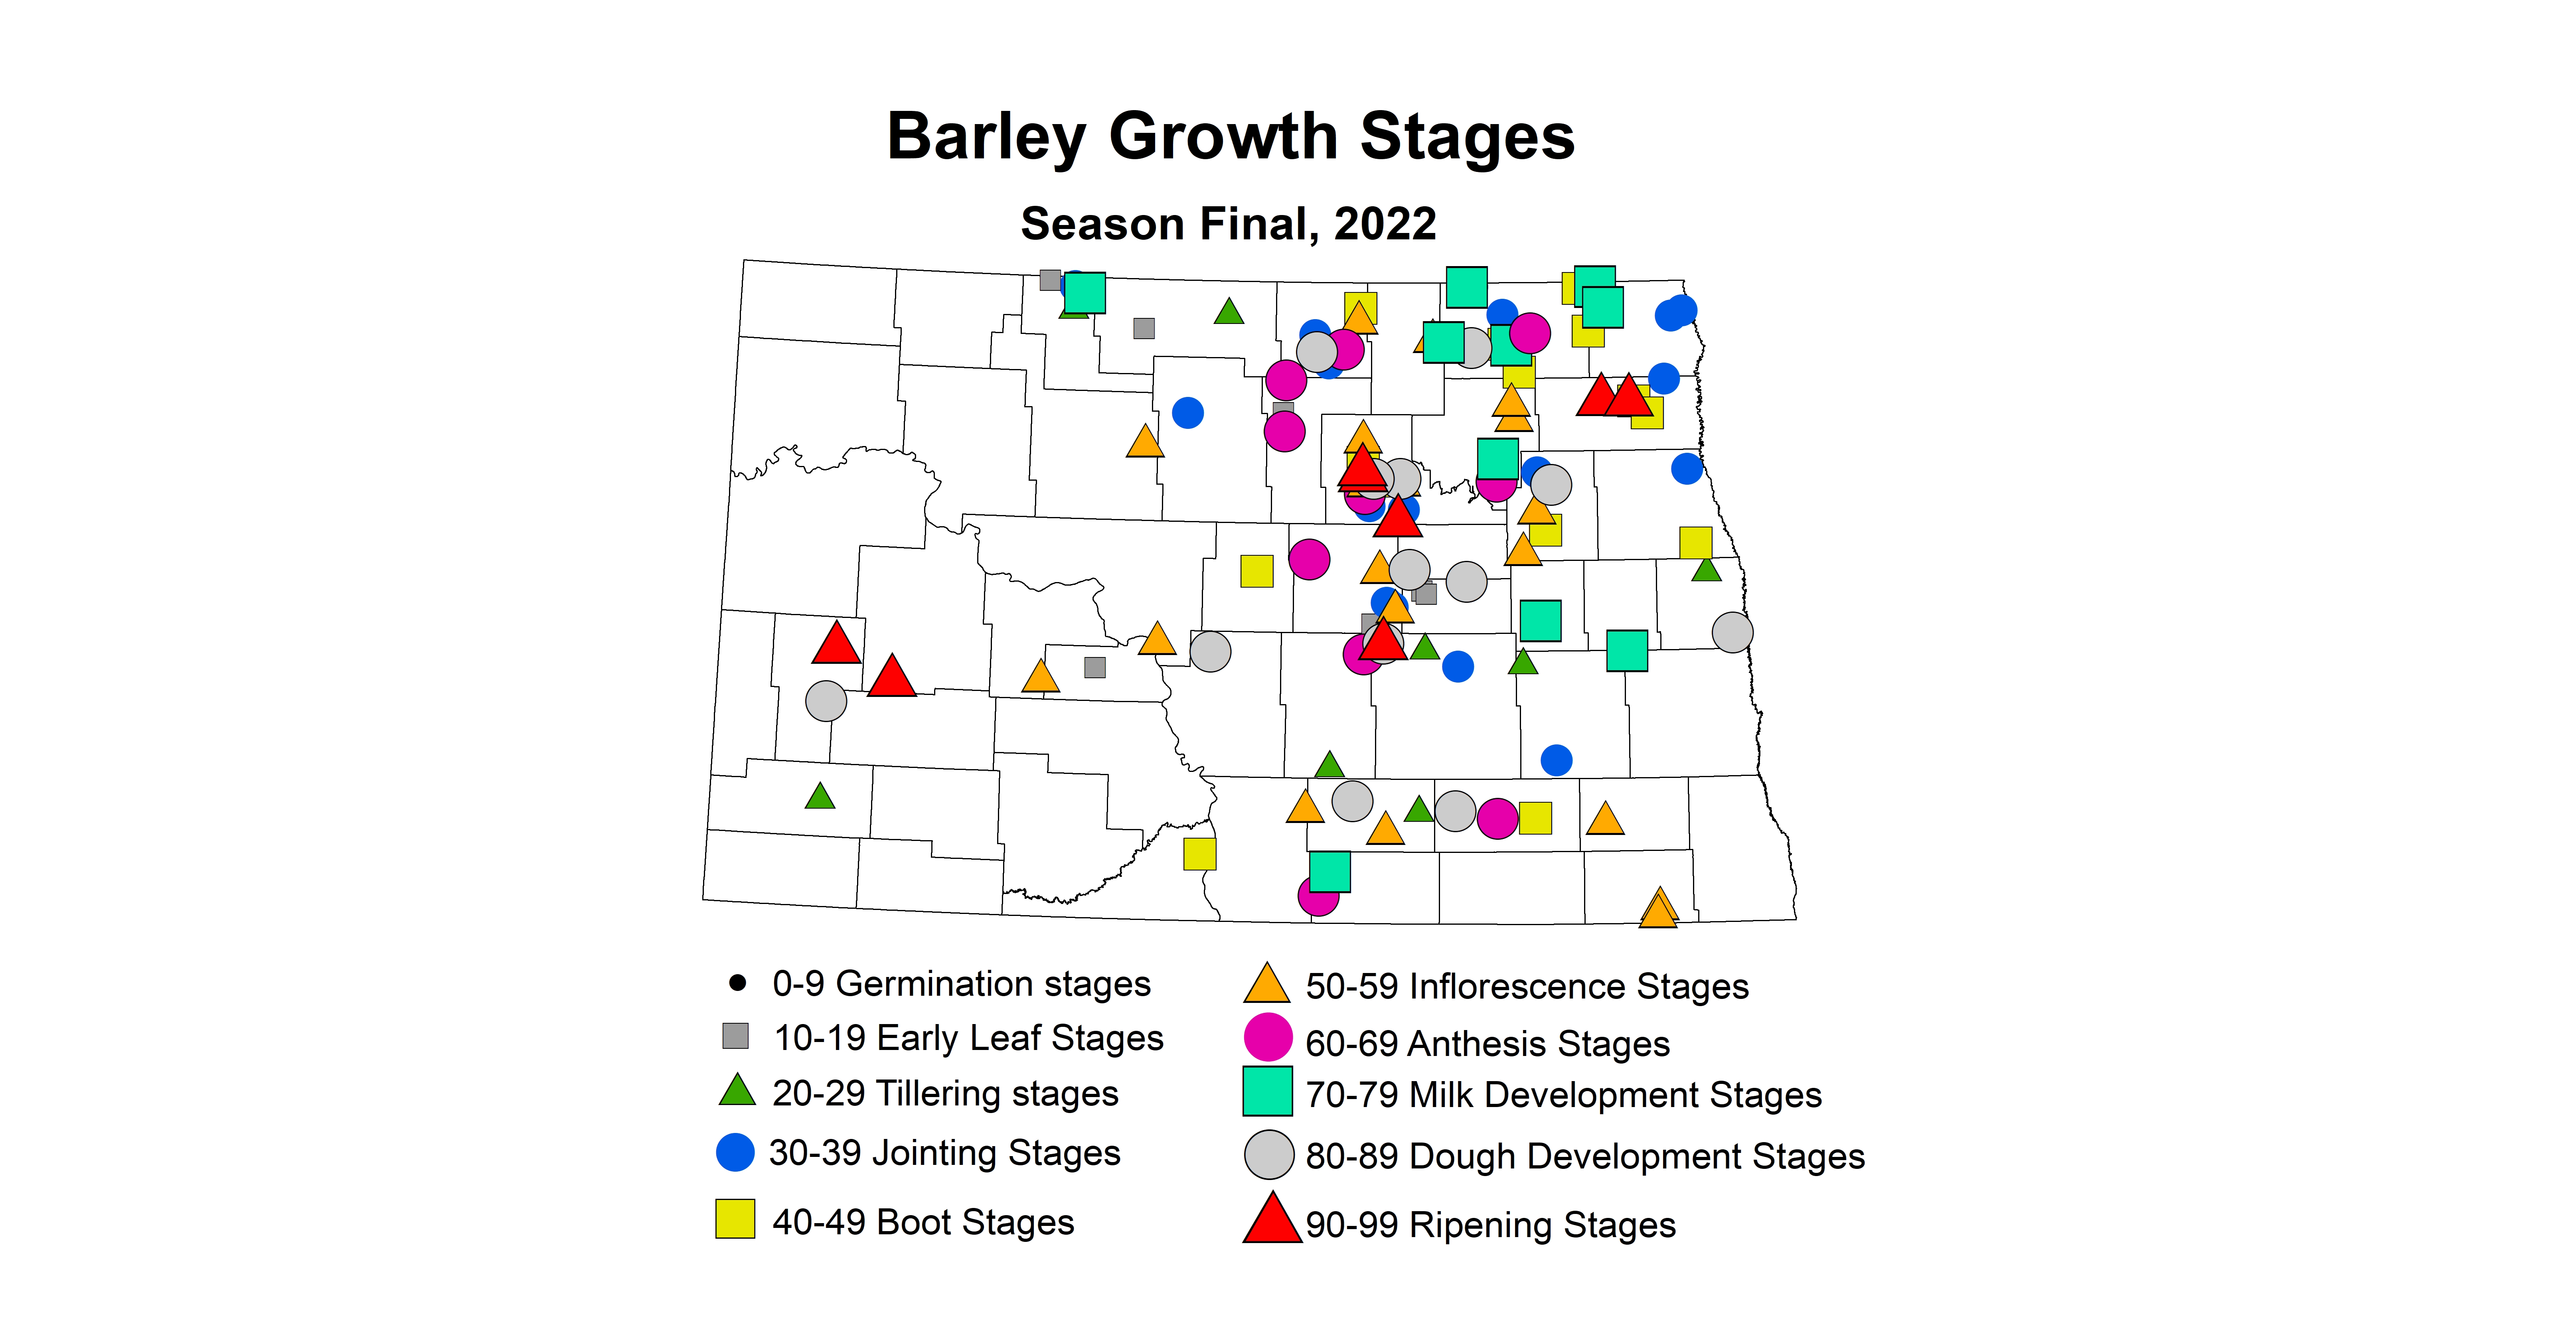 barley growth stages 2022 season final